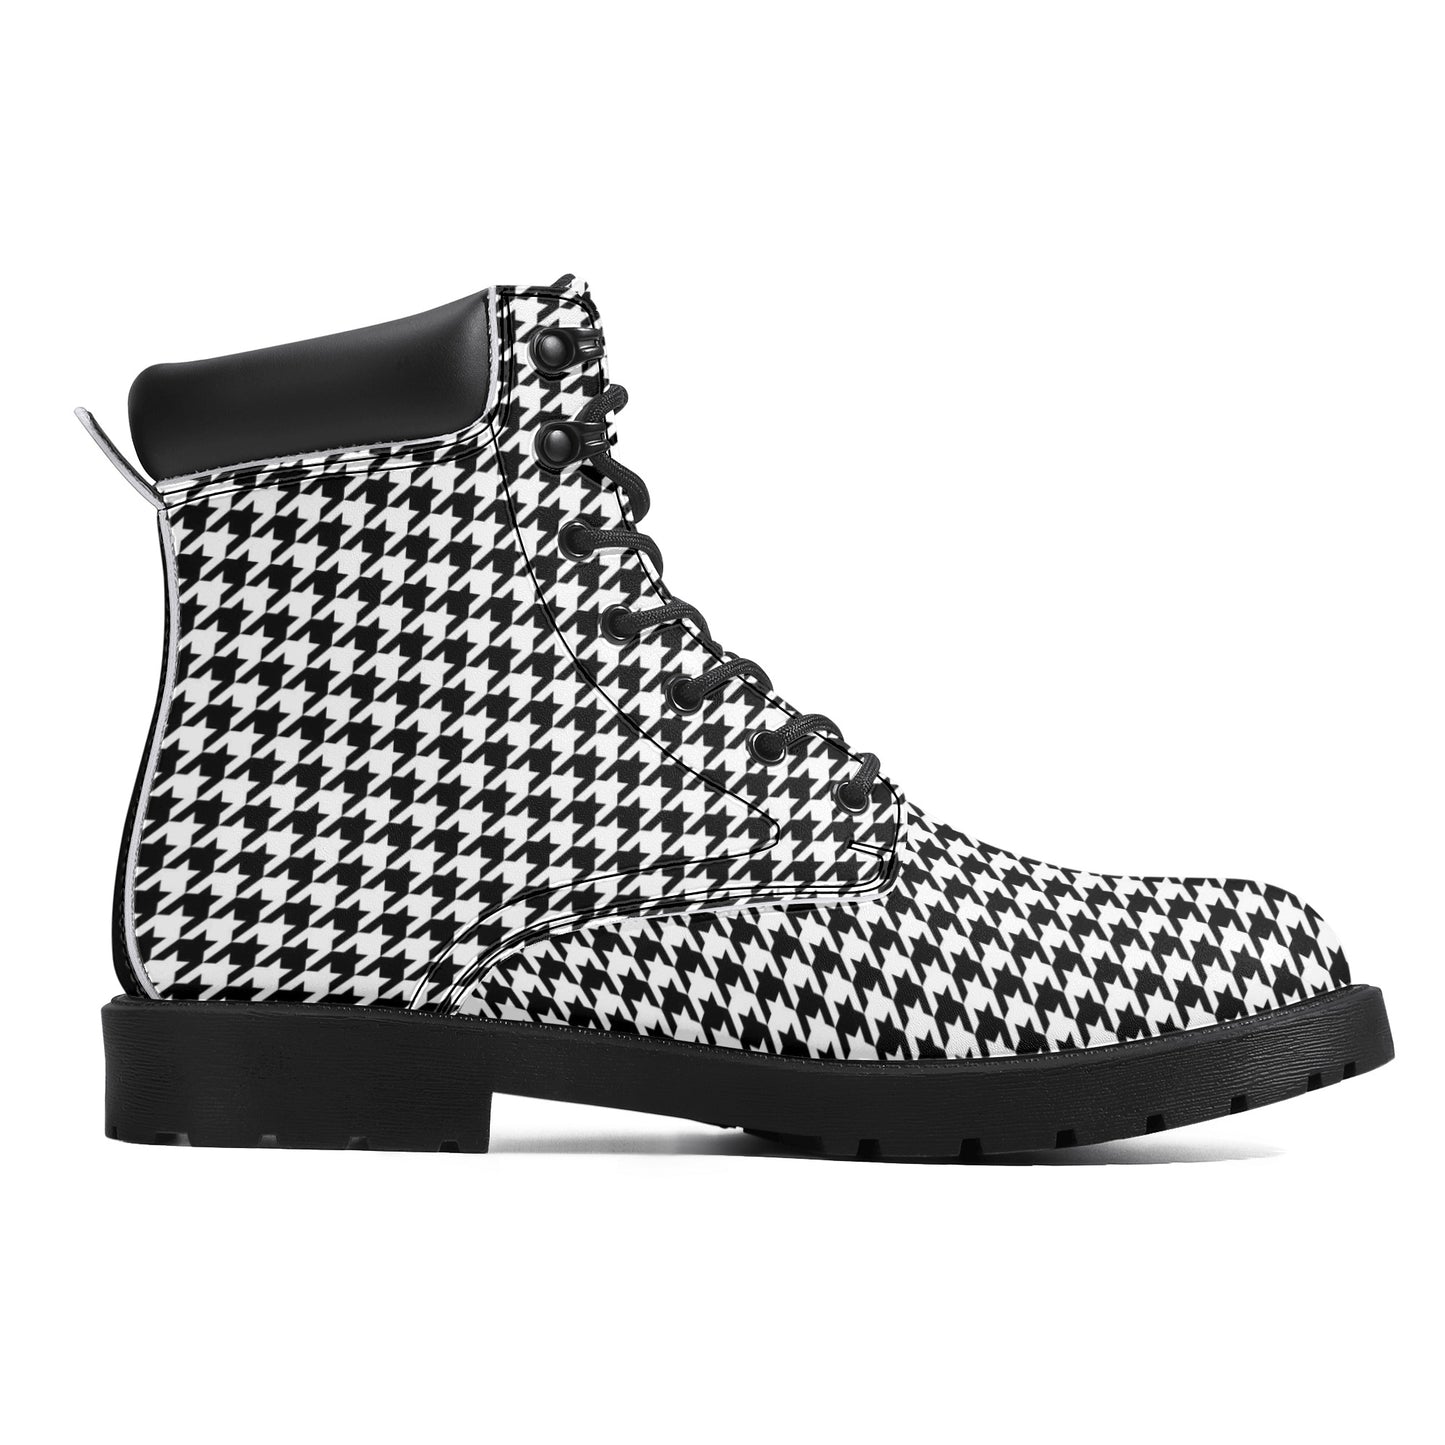 Houndstooth Men Leather Boots, Black White Vegan Lace Up Shoes Hiking Festival Black Ankle Combat Work Winter Waterproof Custom Gift Starcove Fashion